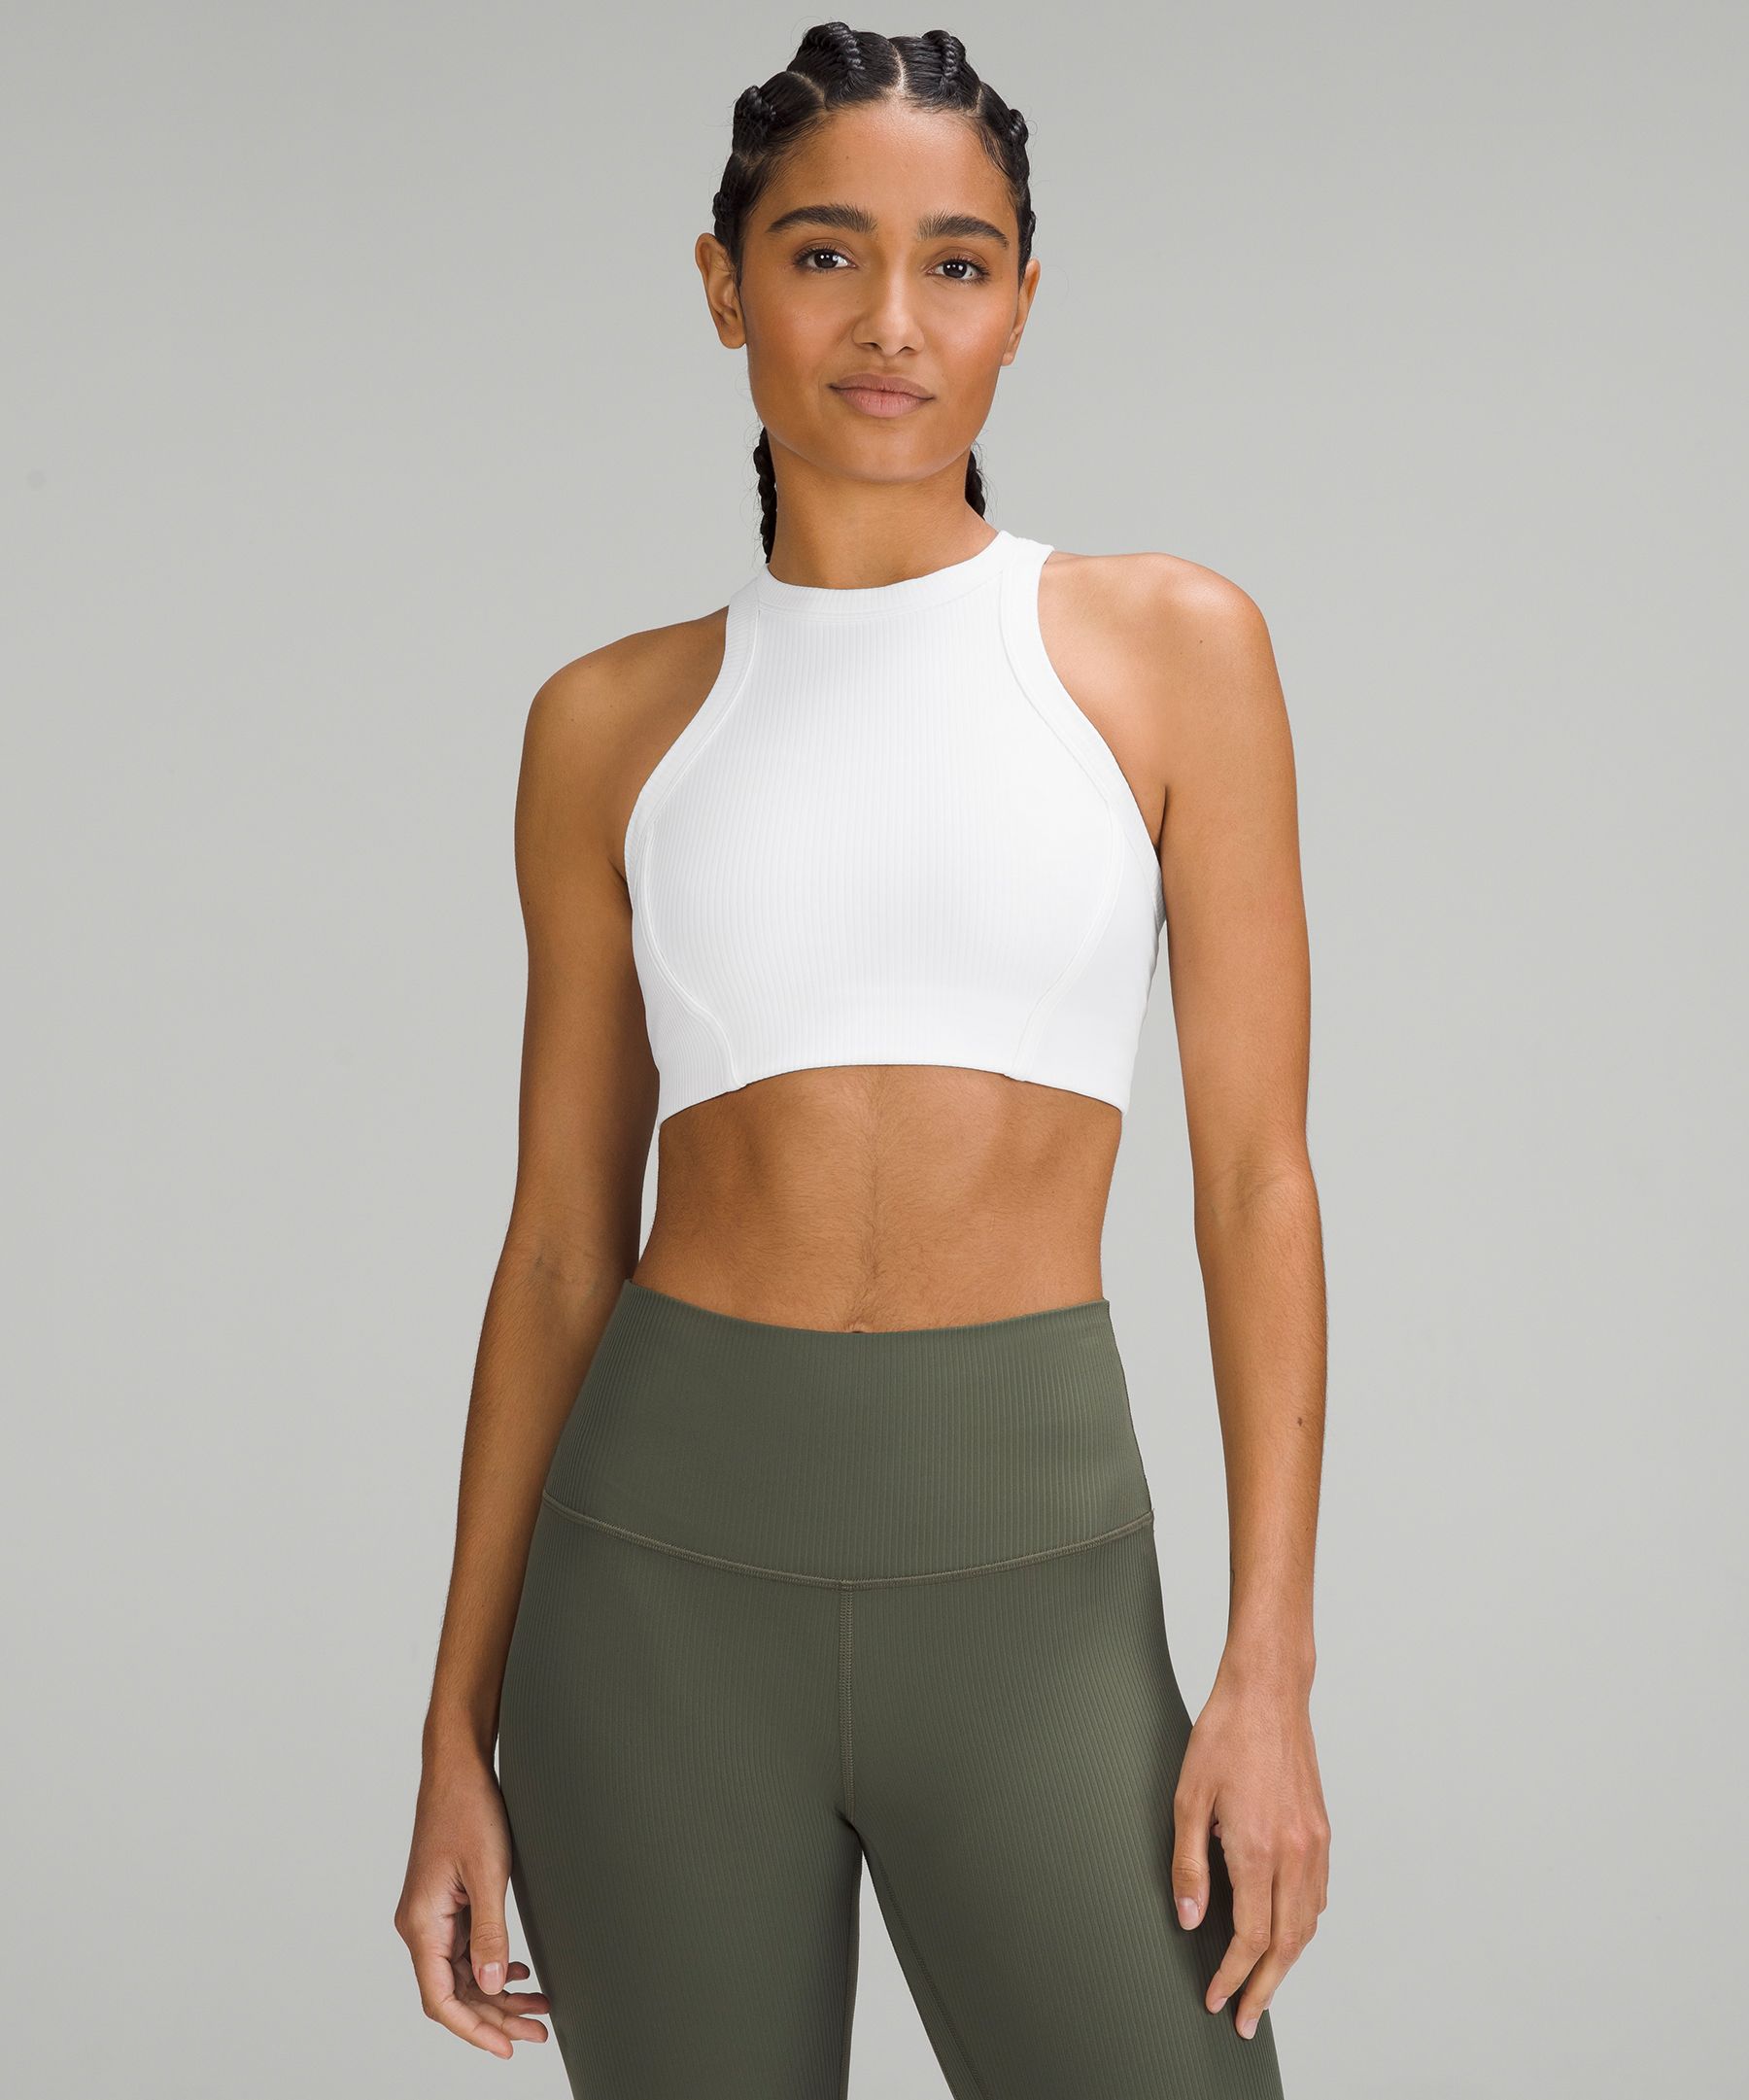 lululemon Moonbow Colour Collection launches: Where to buy 